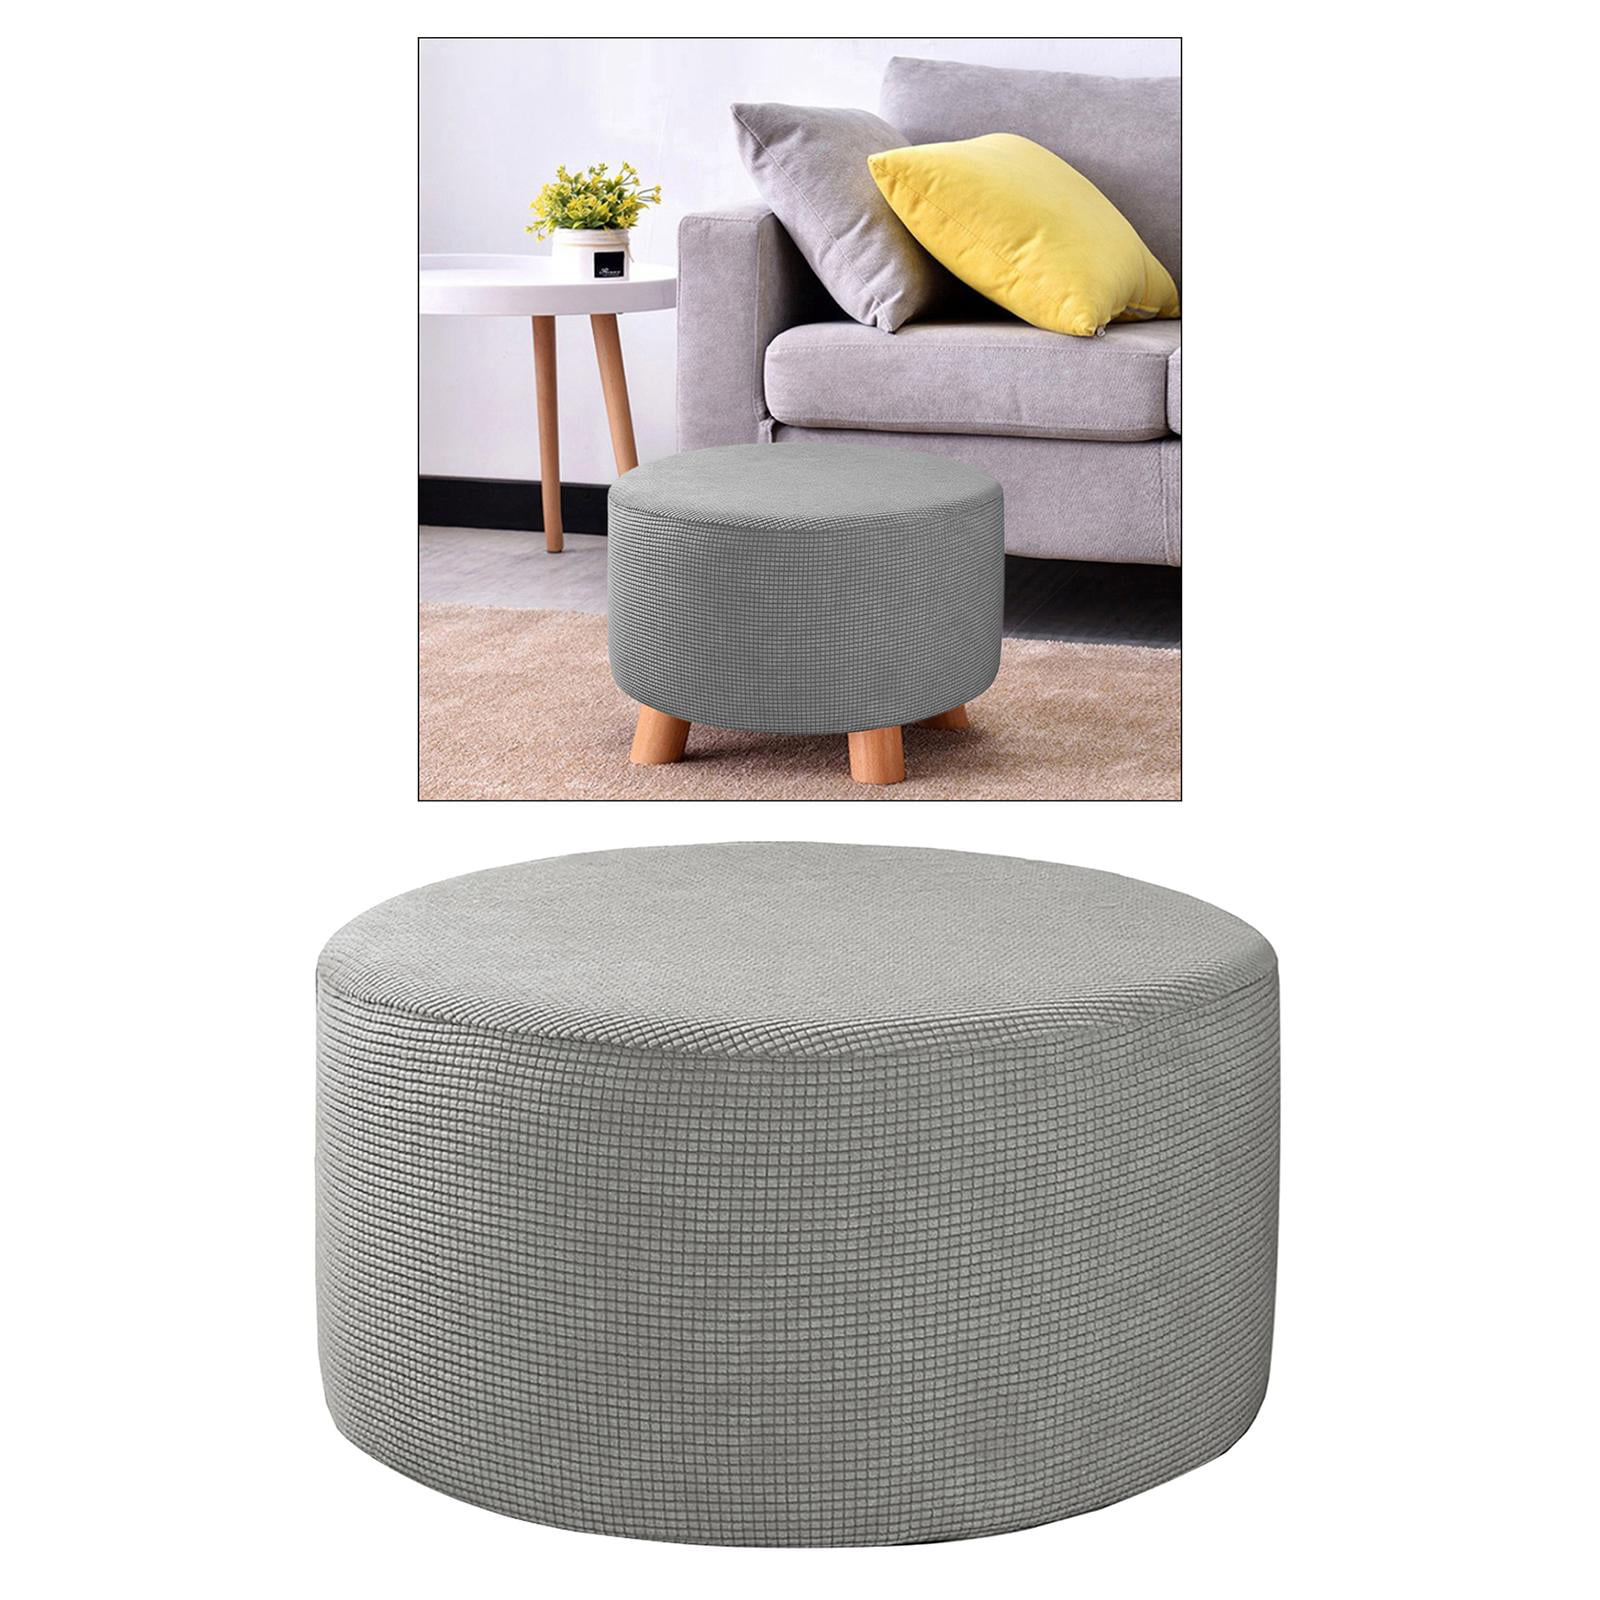 Round Ottoman Slipcovers Round Footstool Cover Protecter Machine Washable 